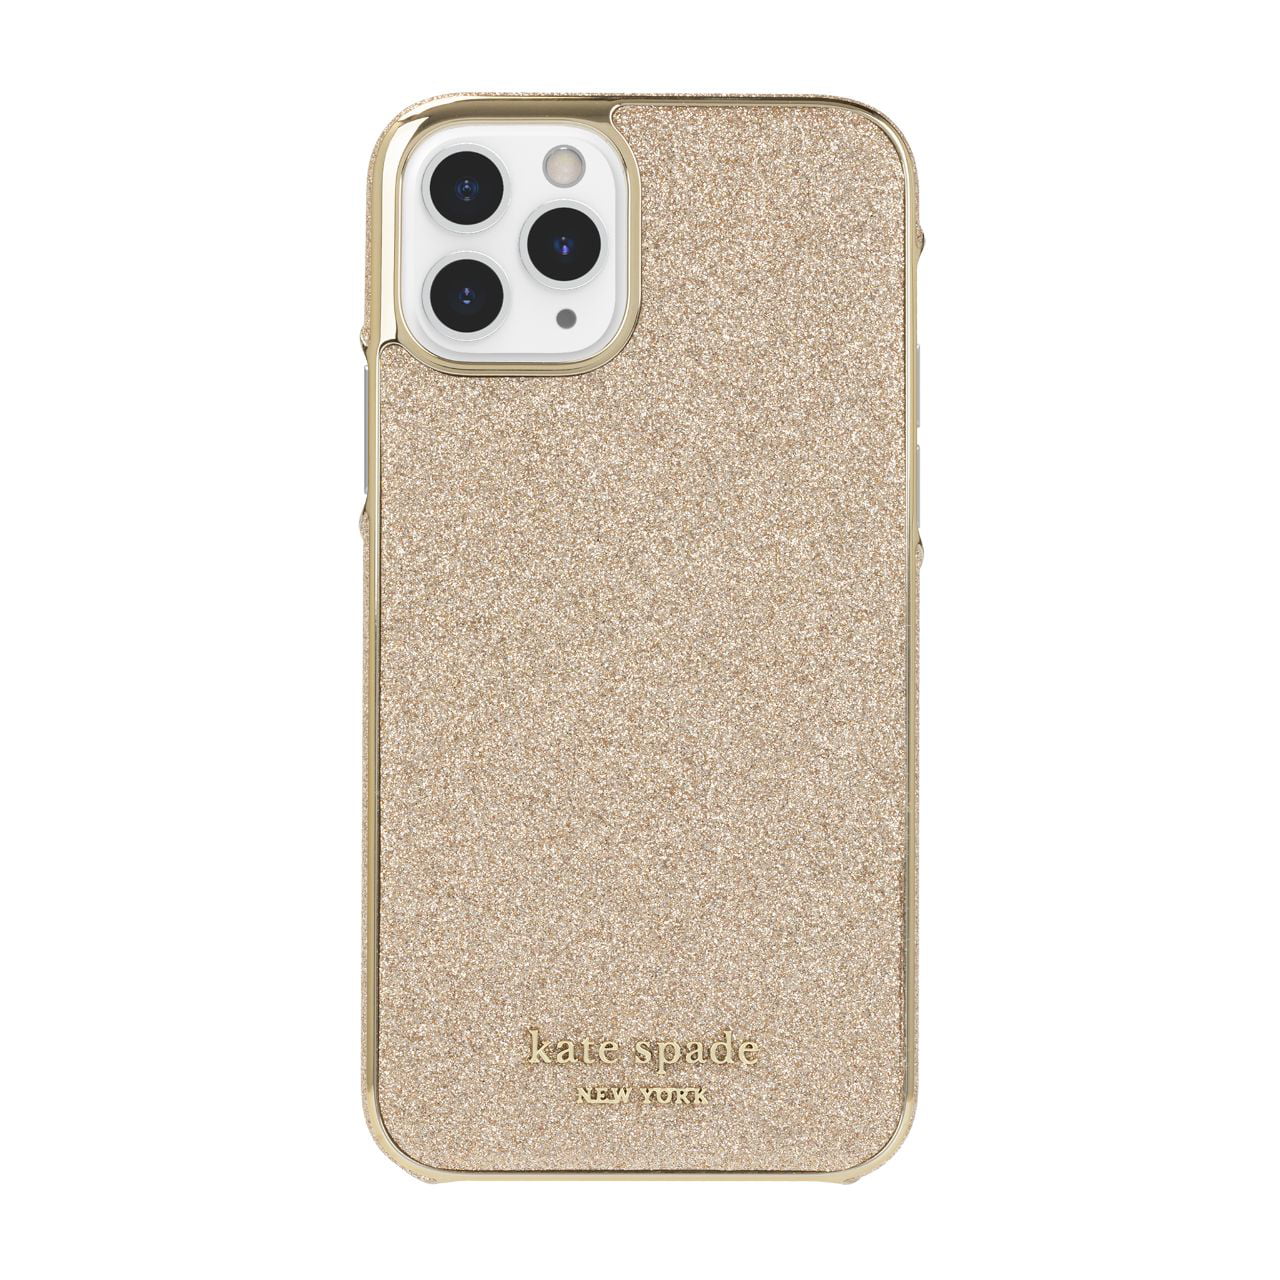 Kate Spade Wrap Case Gold Munera Glitter for iPhone 11 Pro Cases ...